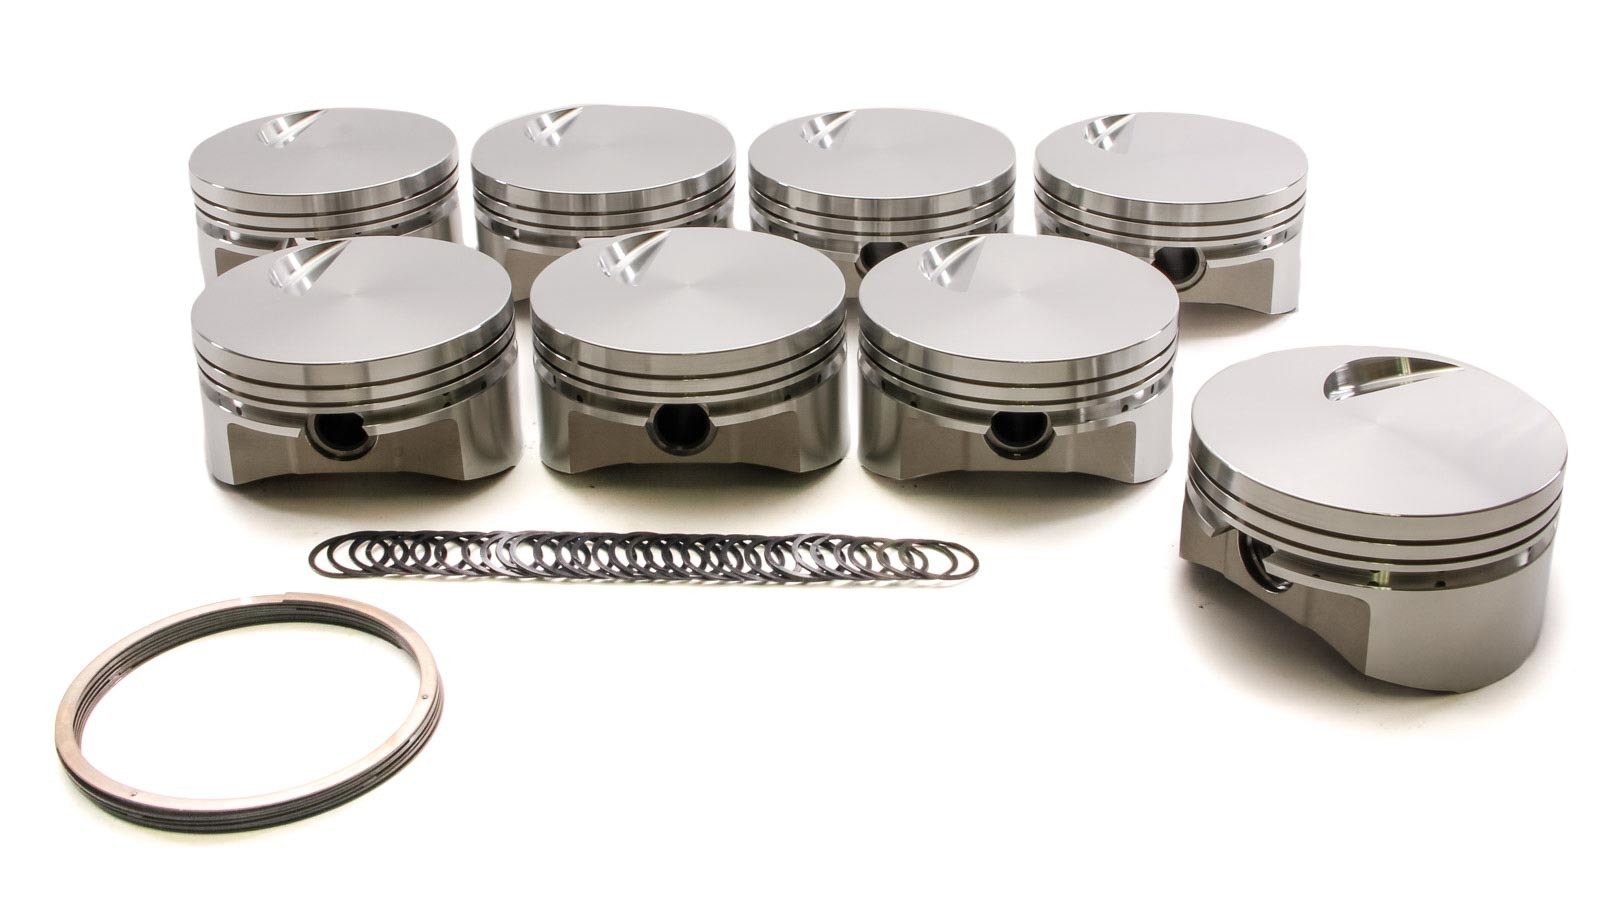 SRP Pistons 142985 Piston, Flat Top, Forged, 4.530 in Bore, 1/16 x 1/16 x 3/16 in Ring Grooves, Minus 3.00 cc, Big Block Chevy, Set of 8